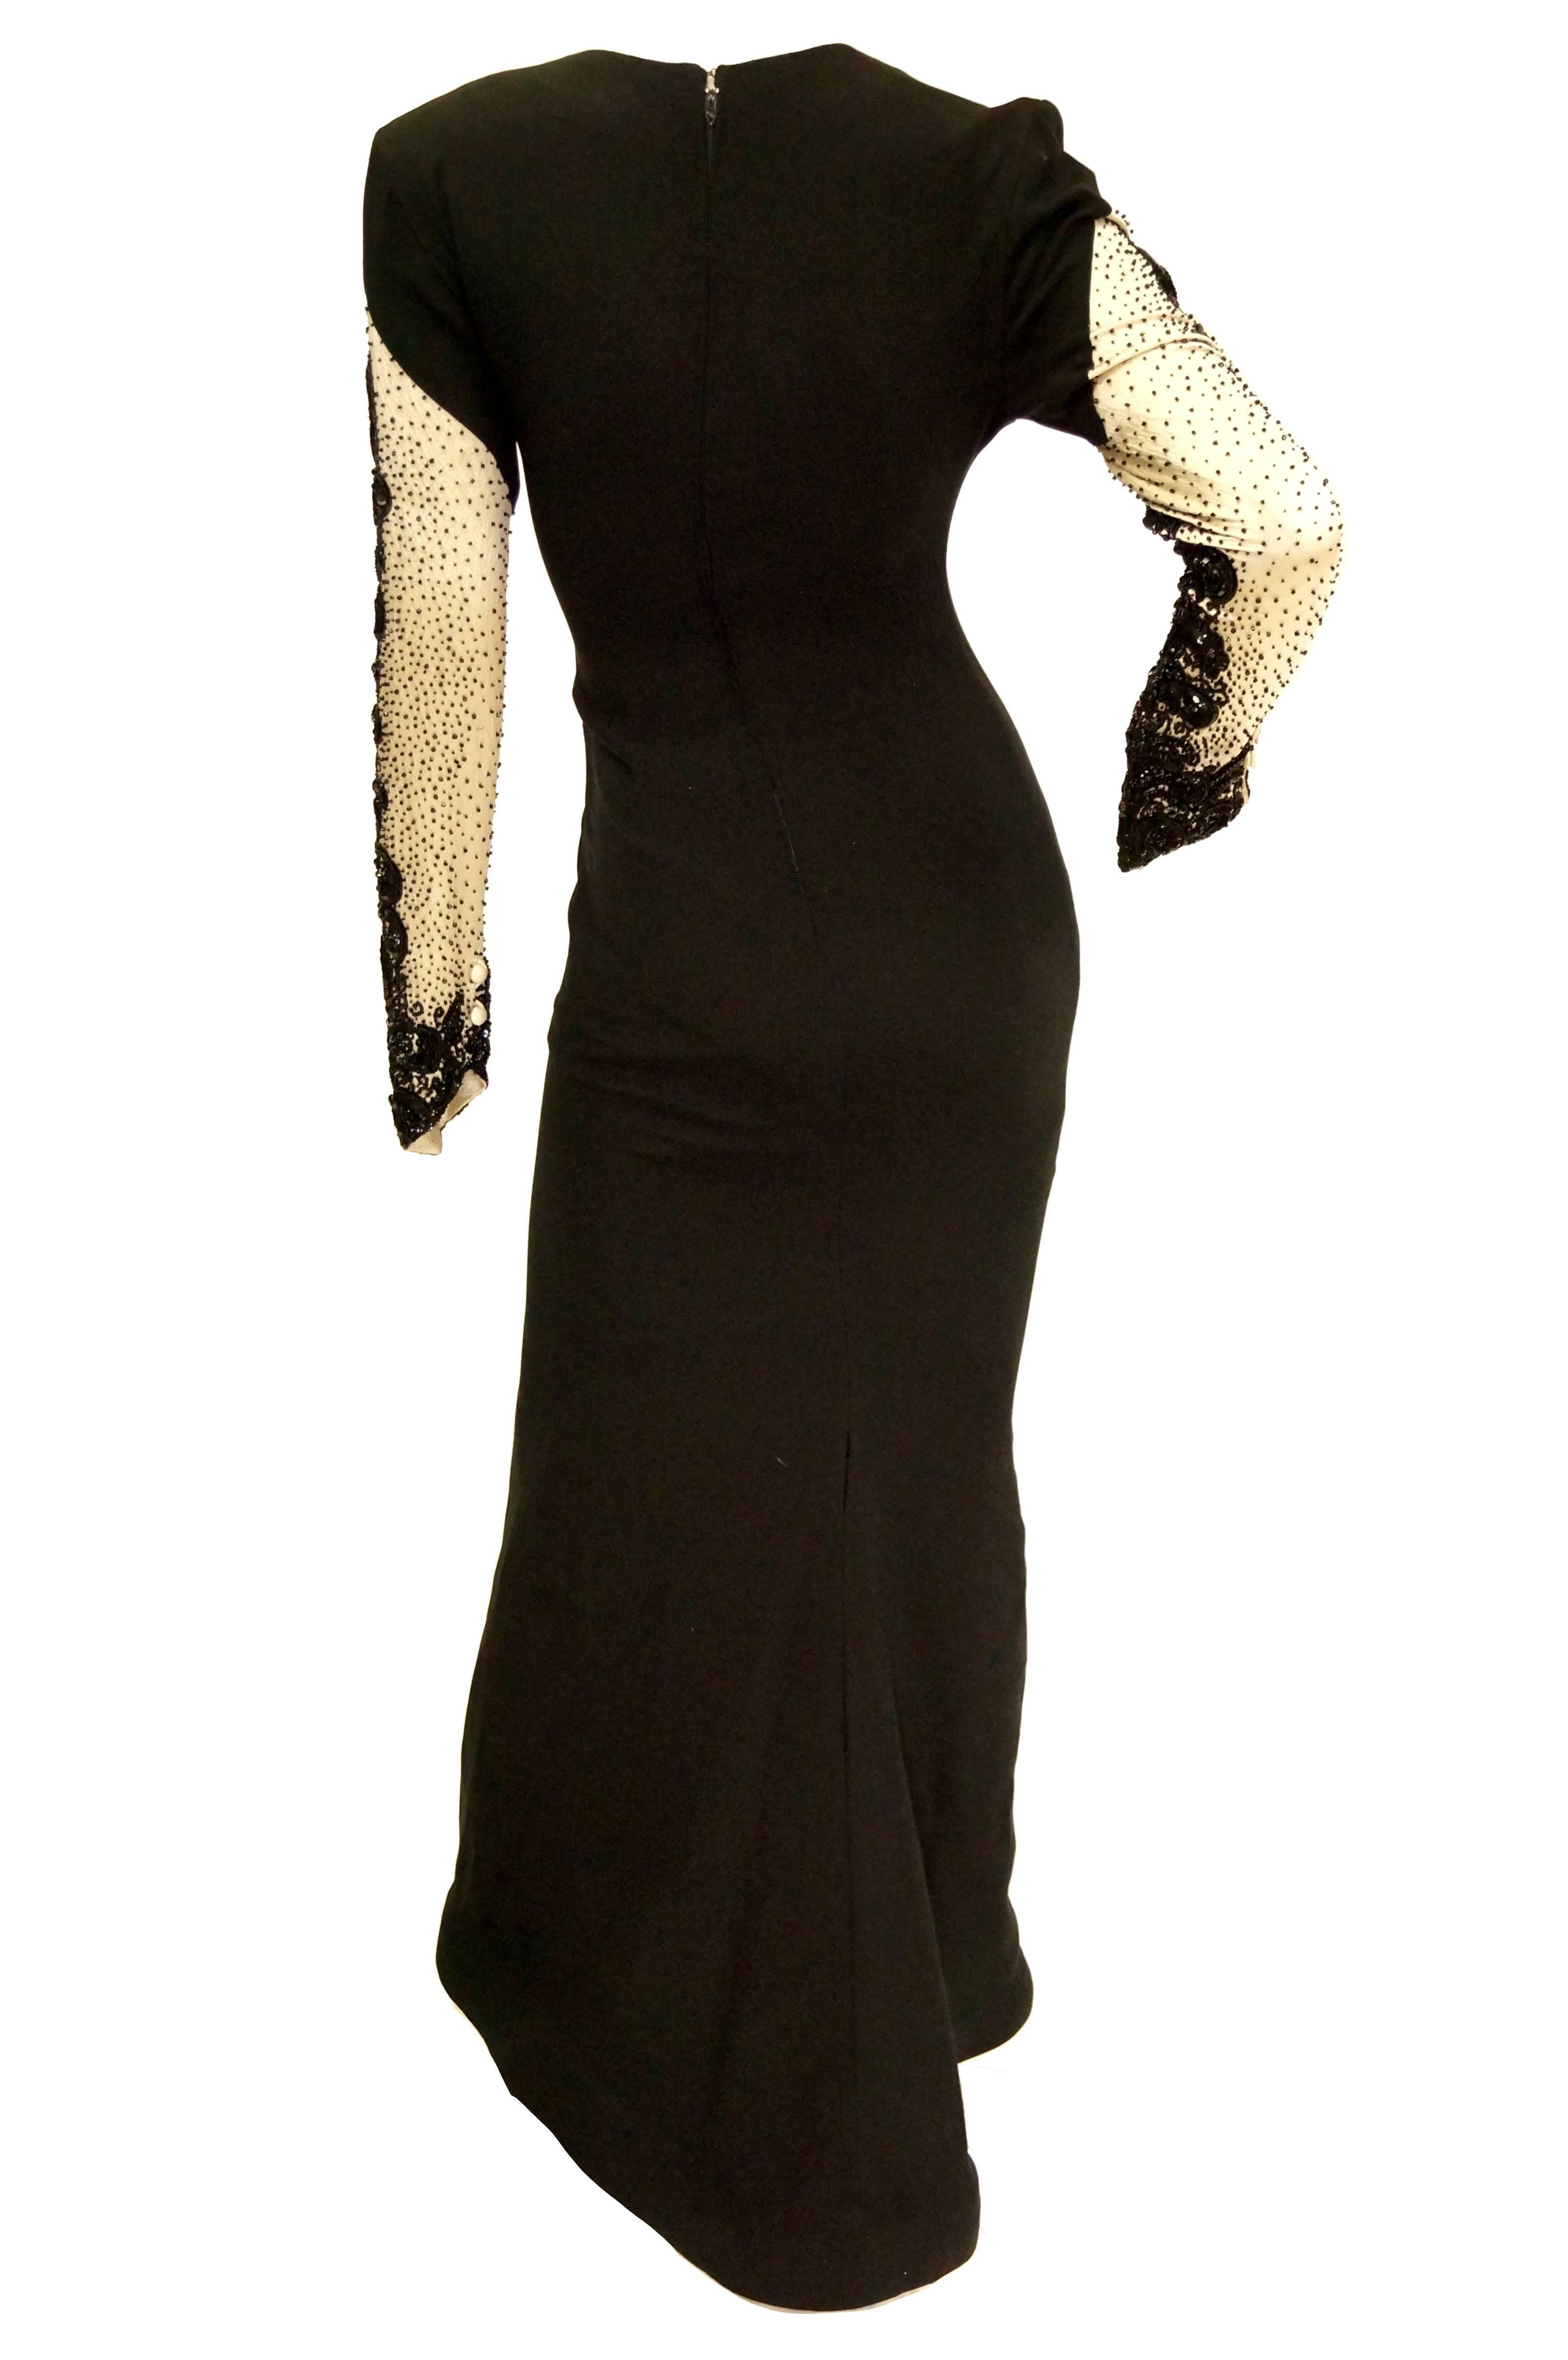 1980s Bill Blass Couture Black and White Beaded Evening Dress For Sale 2